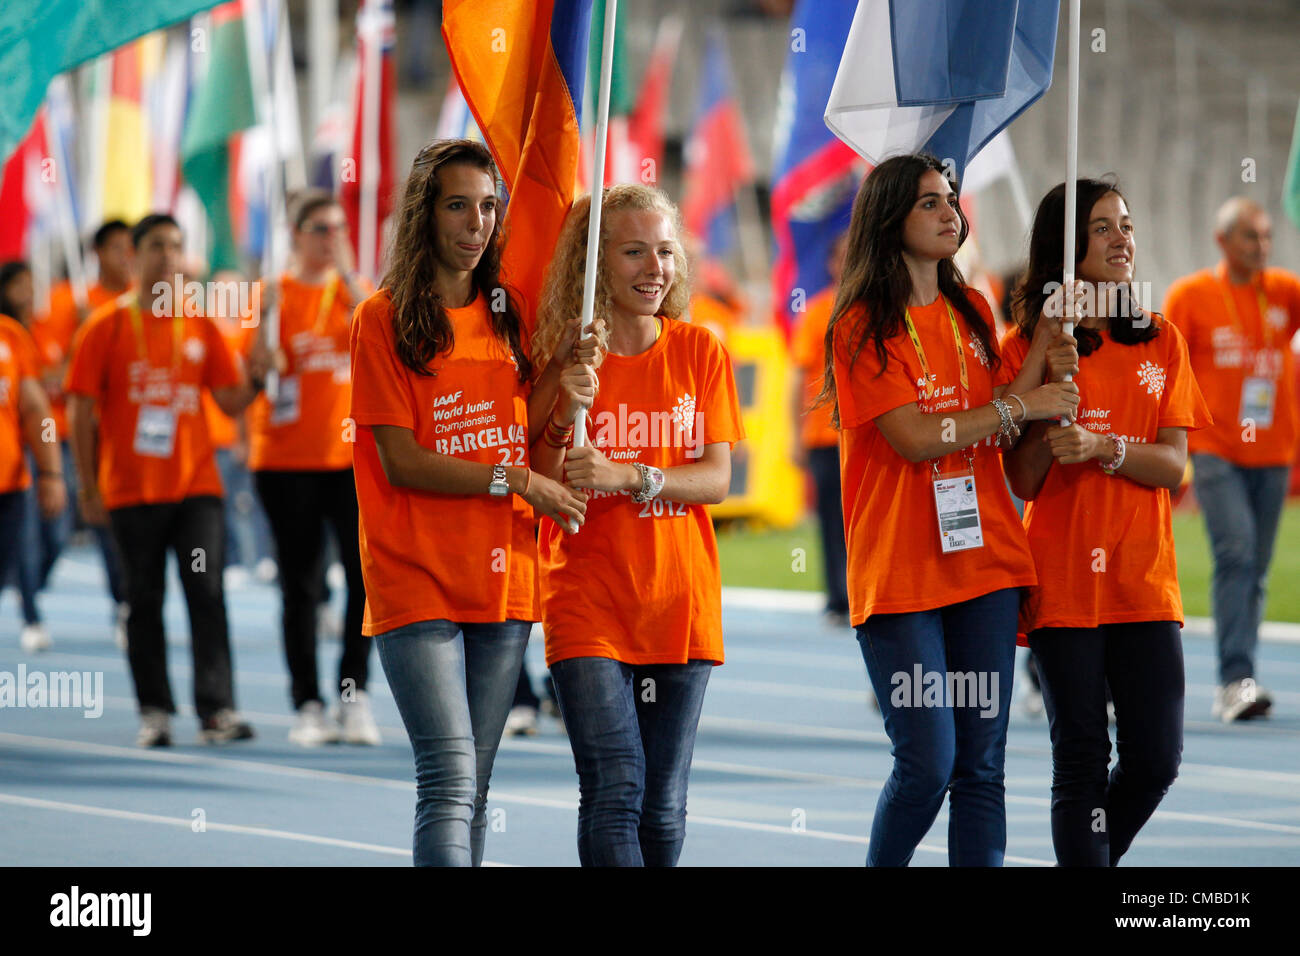 10.07.2012 Barcelona, Spain. Opening Ceremony day one of the IAAF World Junior Championships from the Montjuic Stadium in Barcelona. Stock Photo